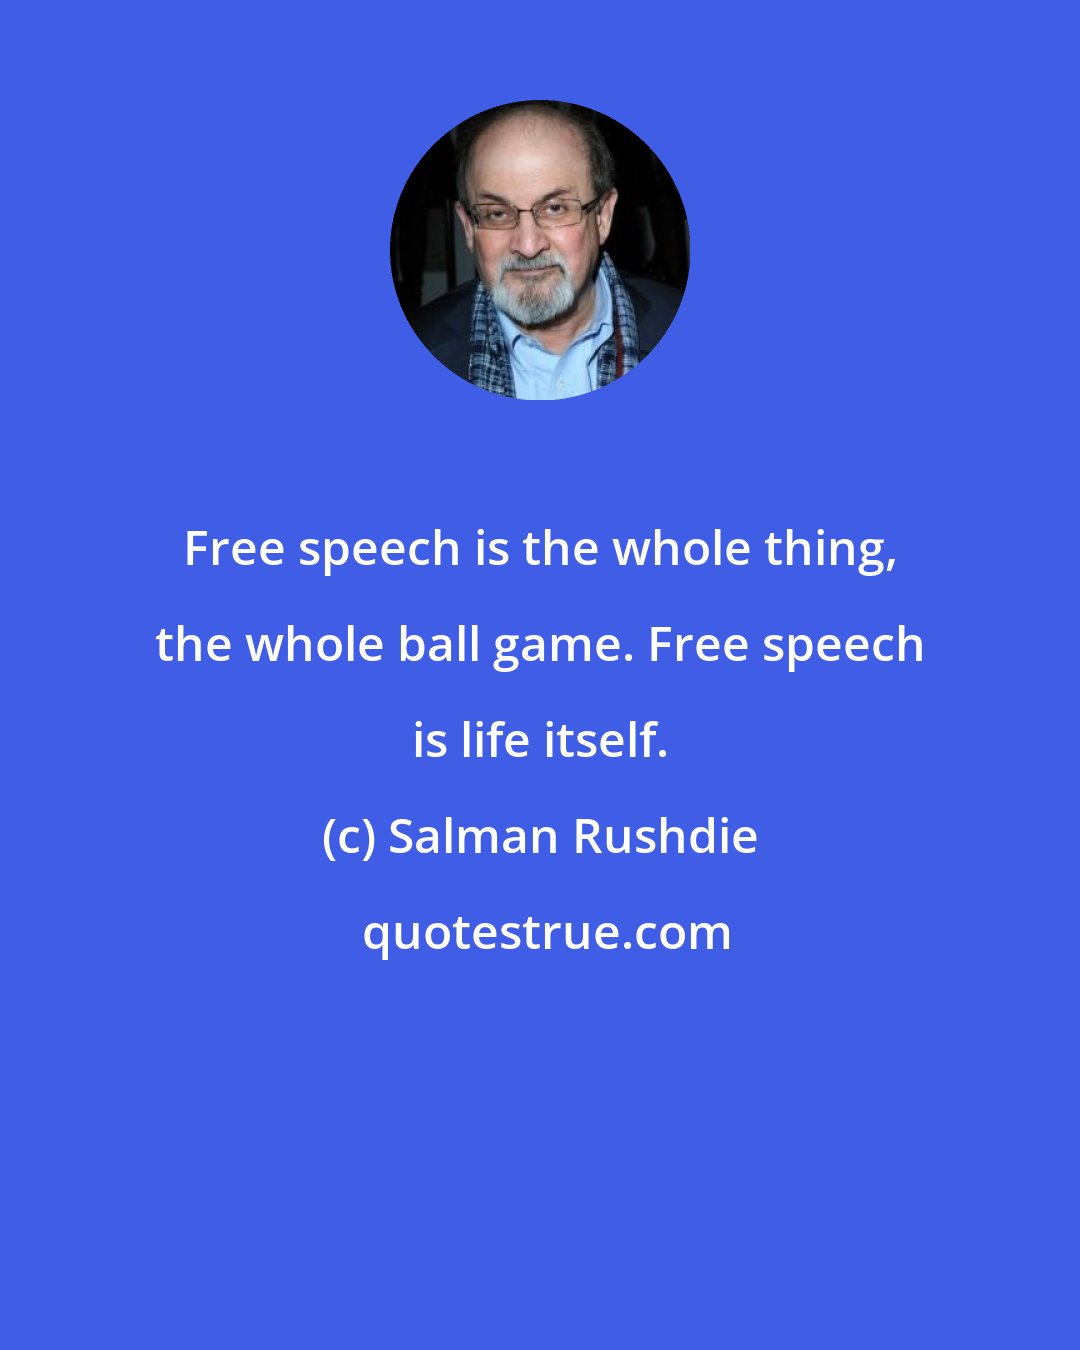 Salman Rushdie: Free speech is the whole thing, the whole ball game. Free speech is life itself.